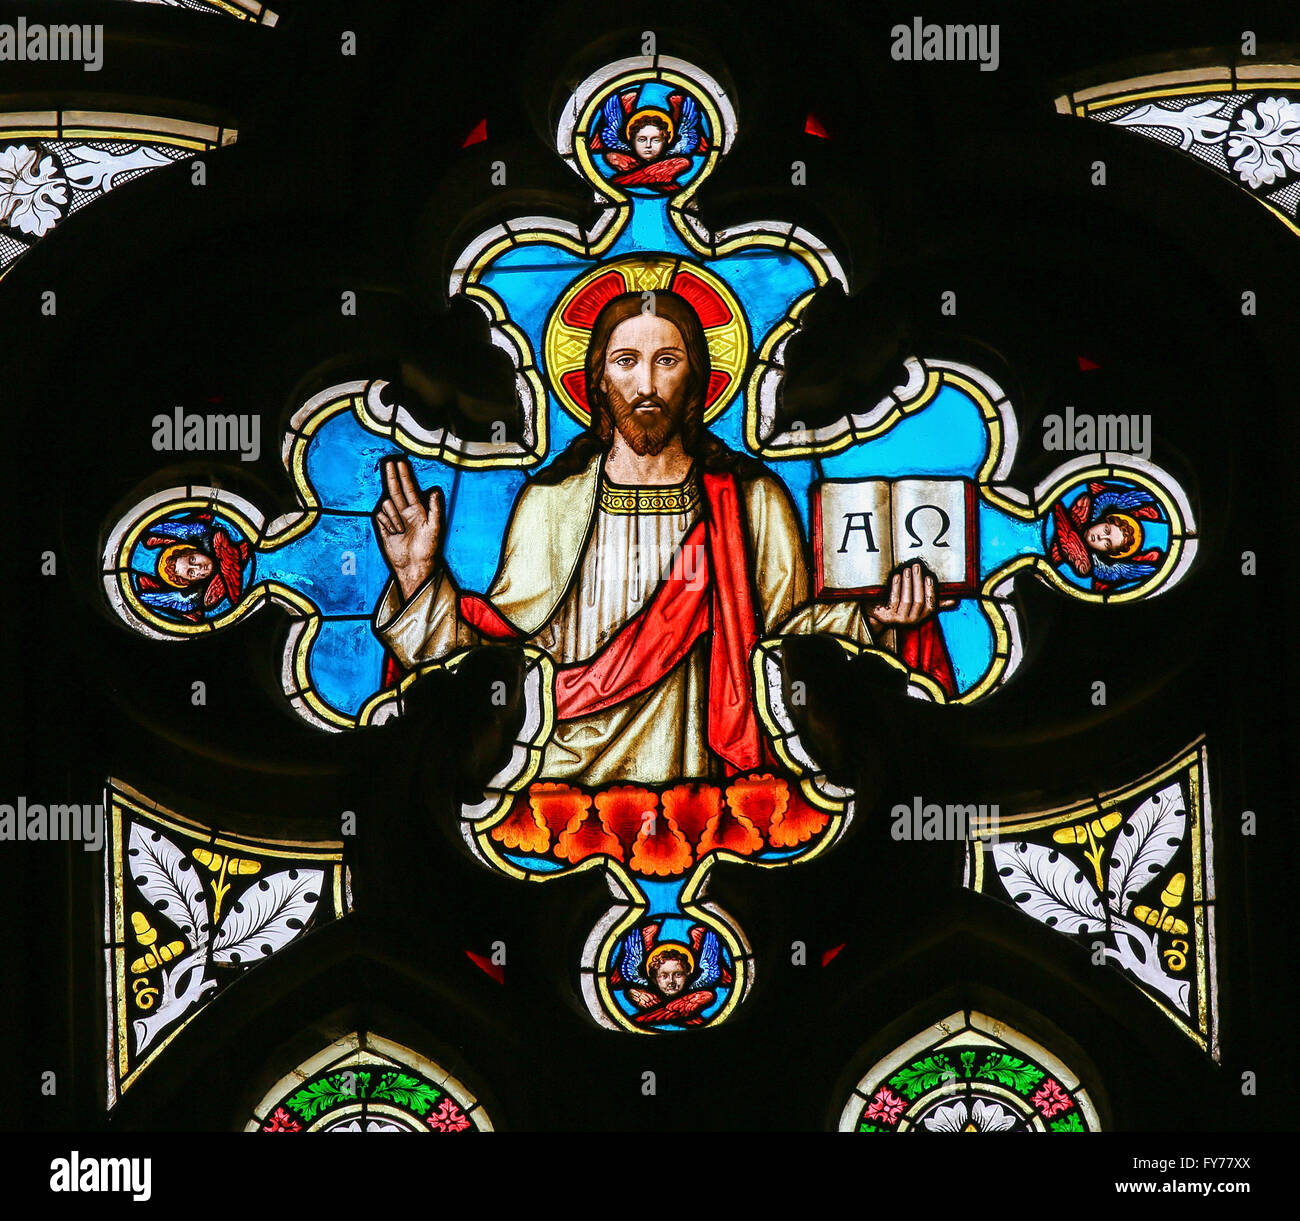 Stained Glass window in St. Vitus Cathedral, Prague, depicting Jesus Christ holding the bible with Greek Letters Alpha and Omega Stock Photo